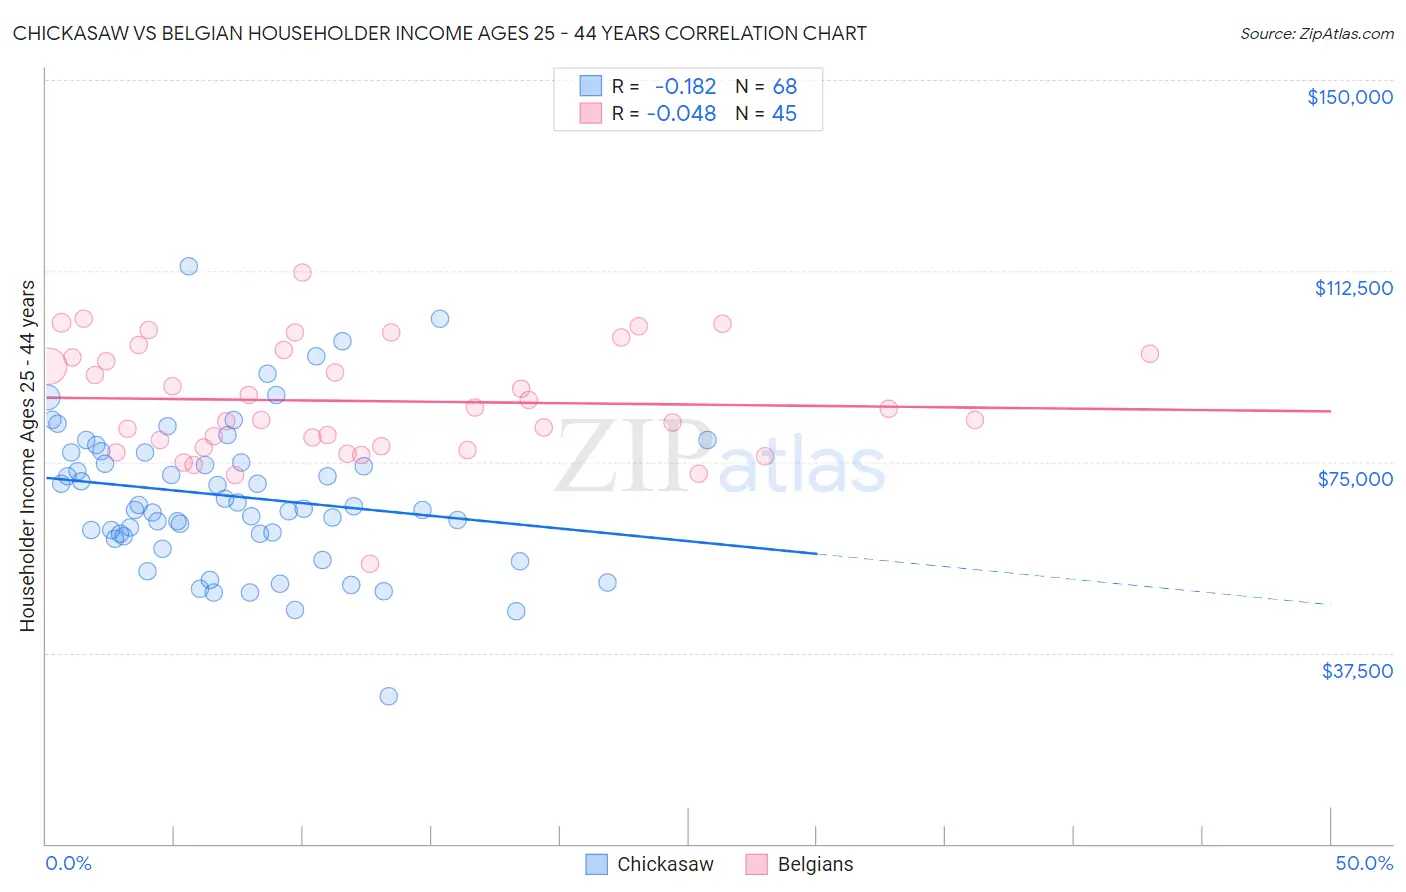 Chickasaw vs Belgian Householder Income Ages 25 - 44 years